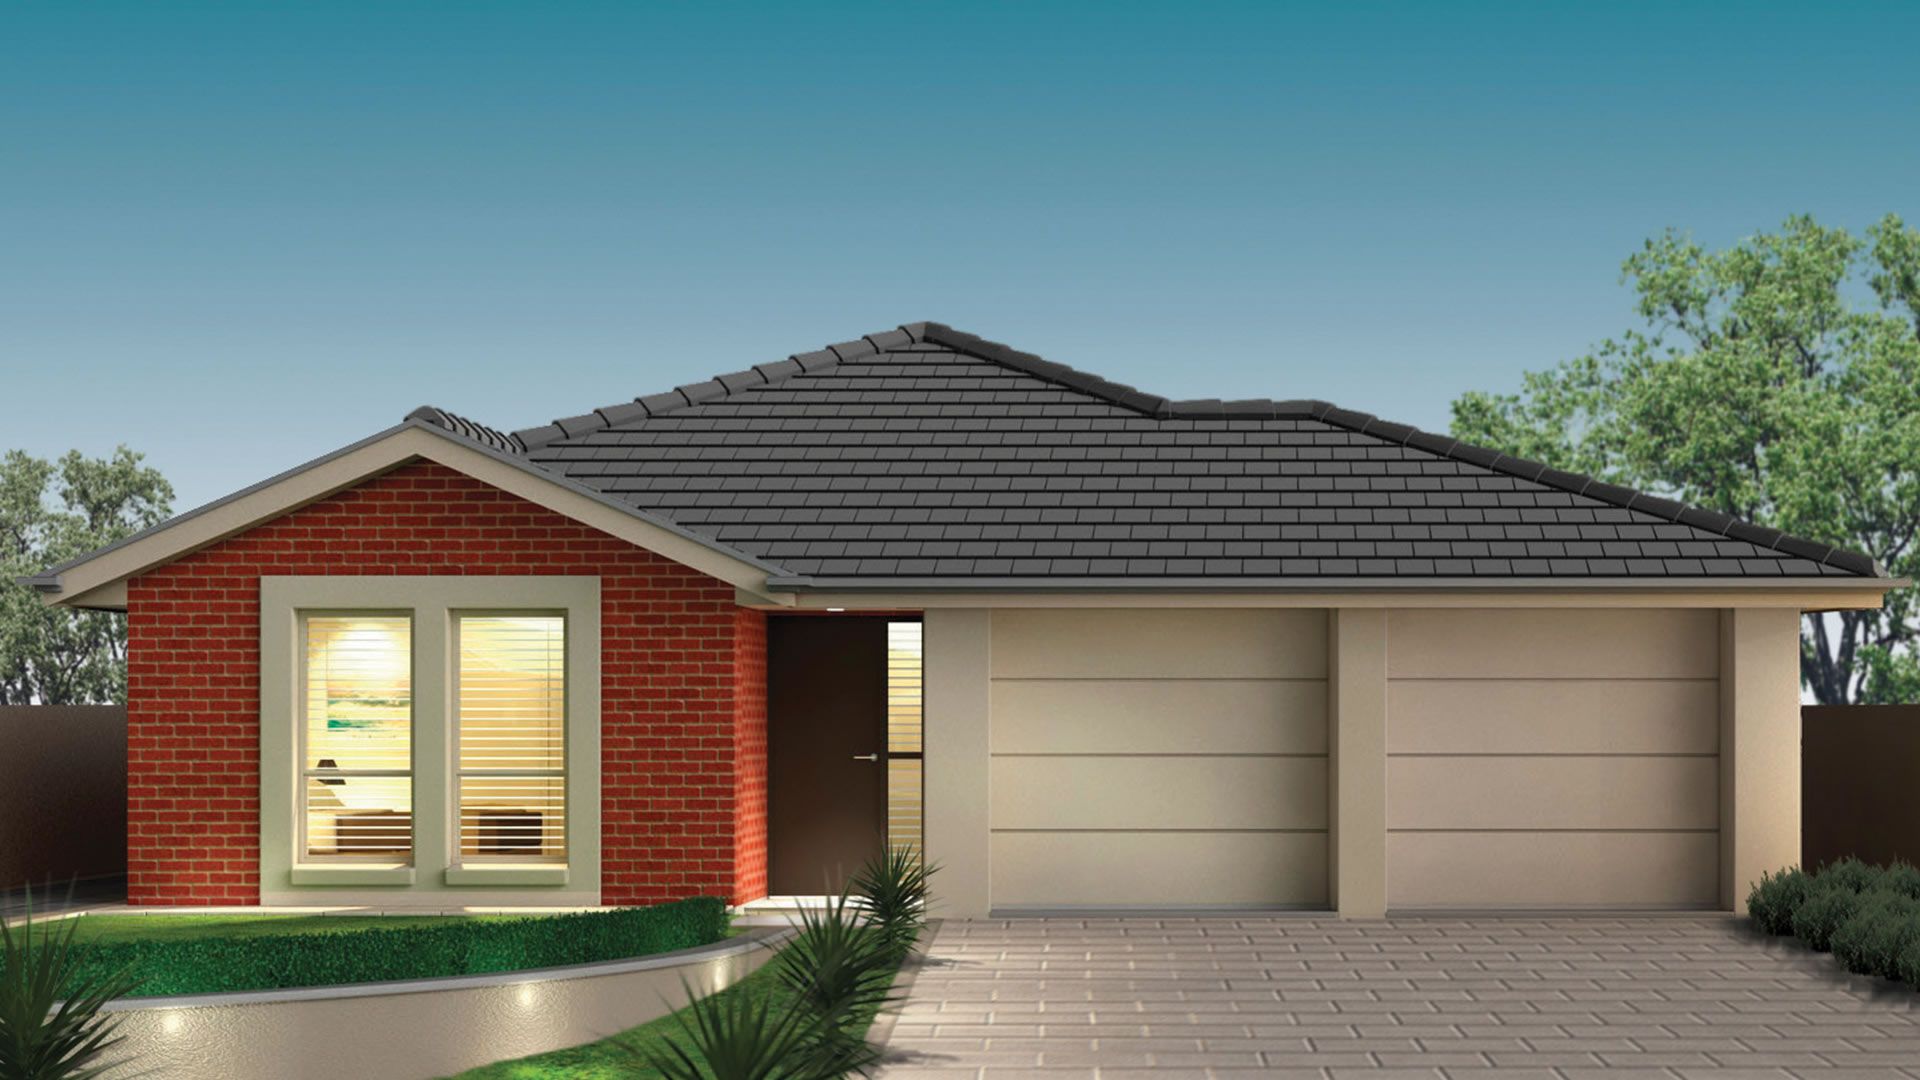 3 bedrooms New House & Land in Lot 4009 Carter Road GAWLER SA, 5118